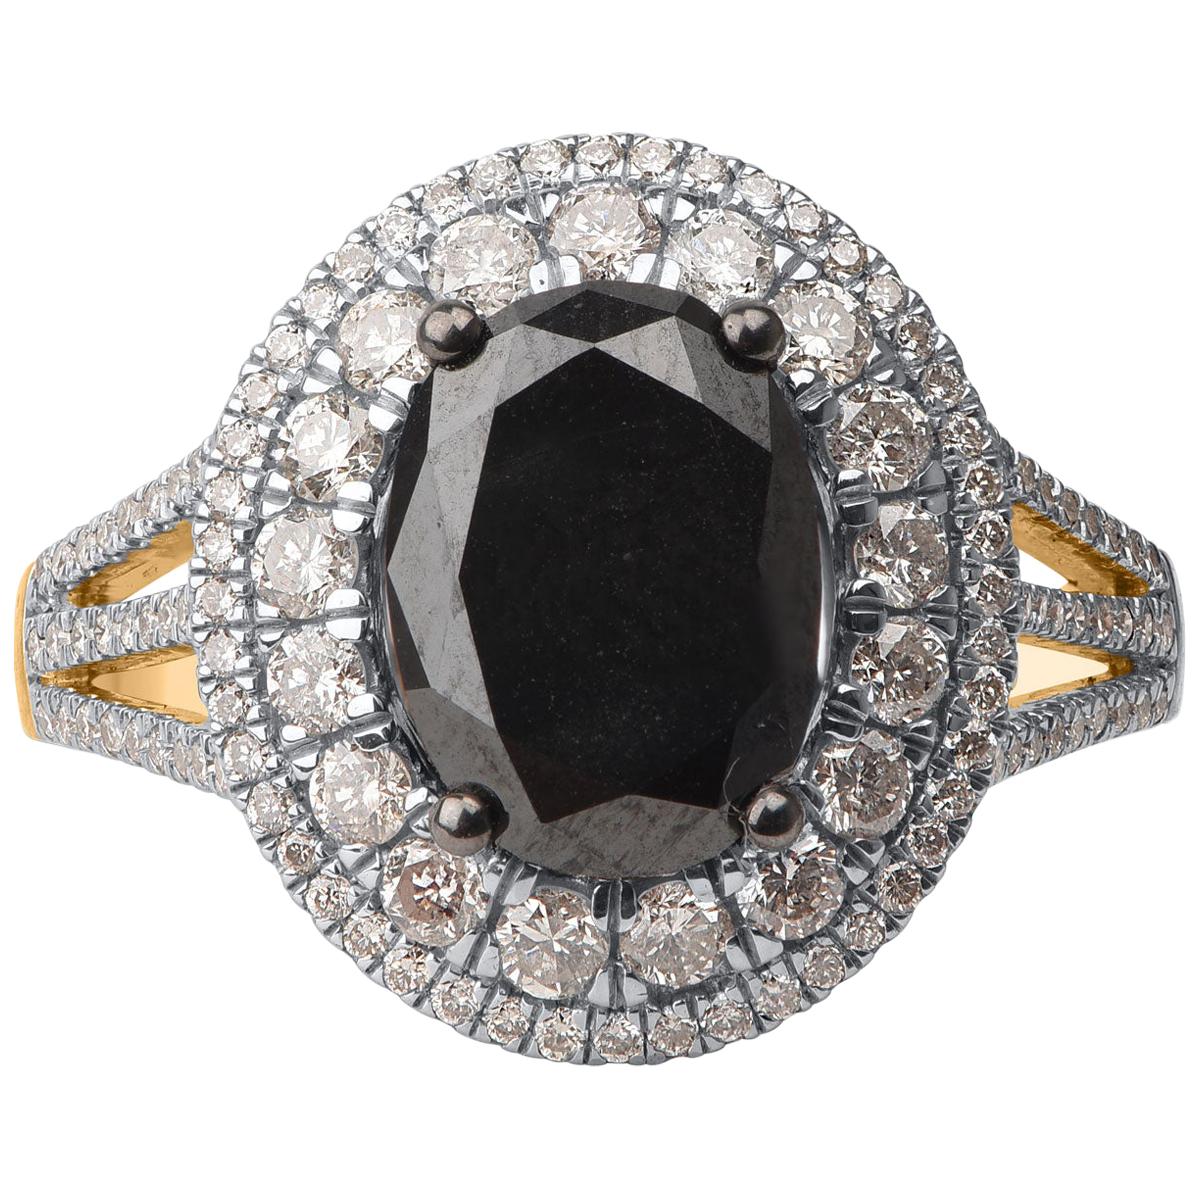 TJD 3 1/2 Carat White and Treated Black Diamond 14 Karat Yellow Gold Oval Ring For Sale